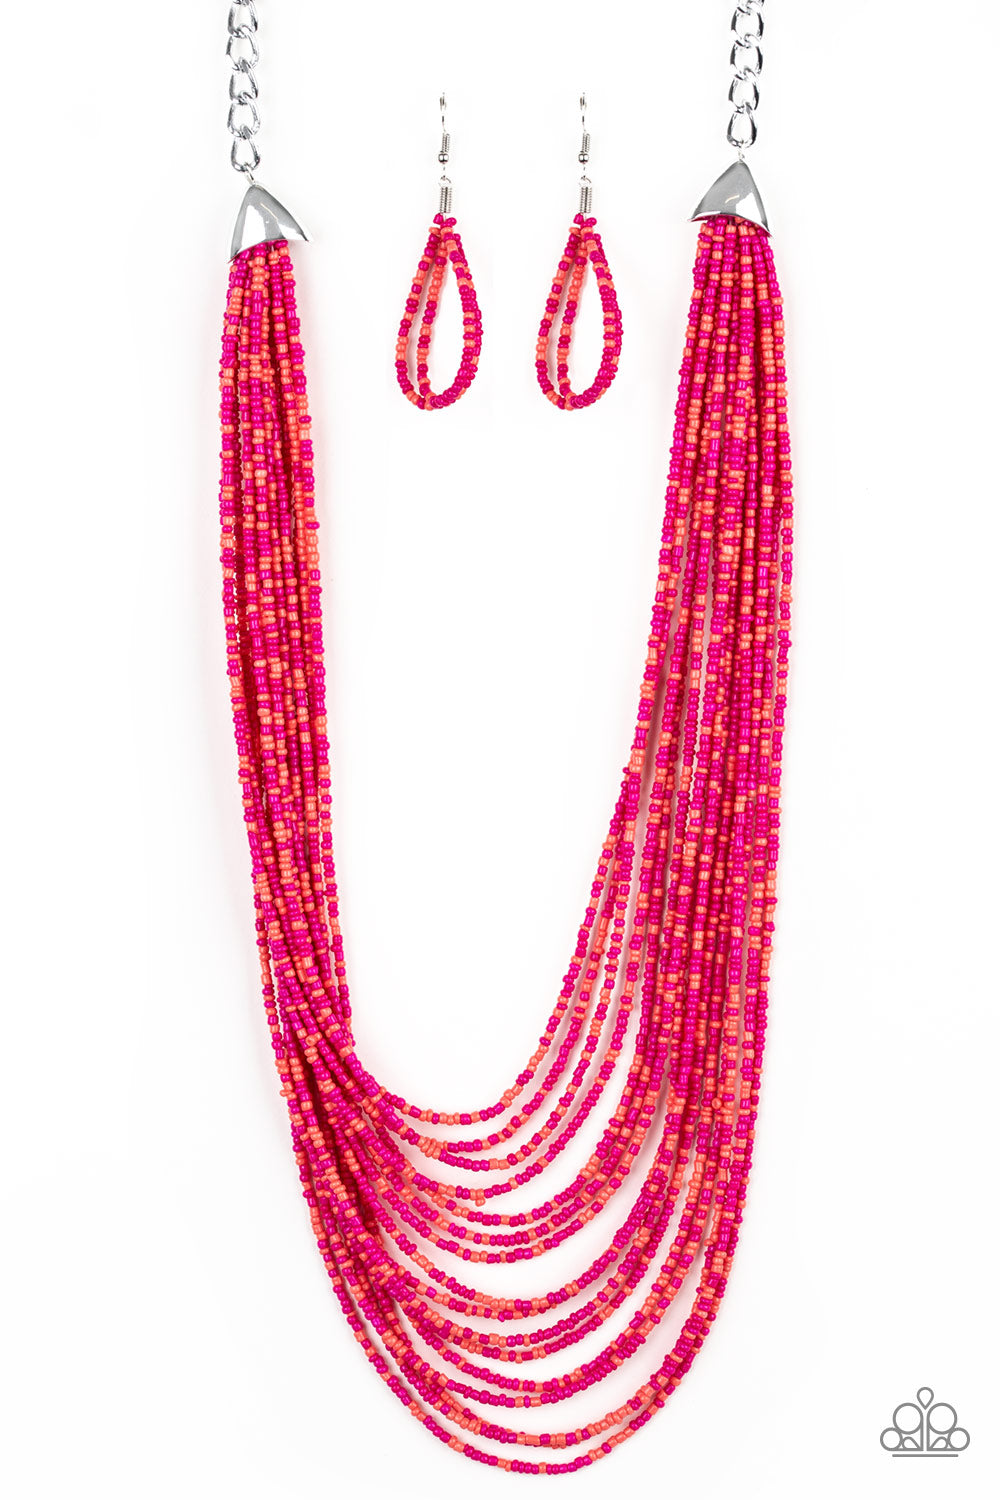 Peacefully Pacific - Pink/Coral Orange seed bead necklace